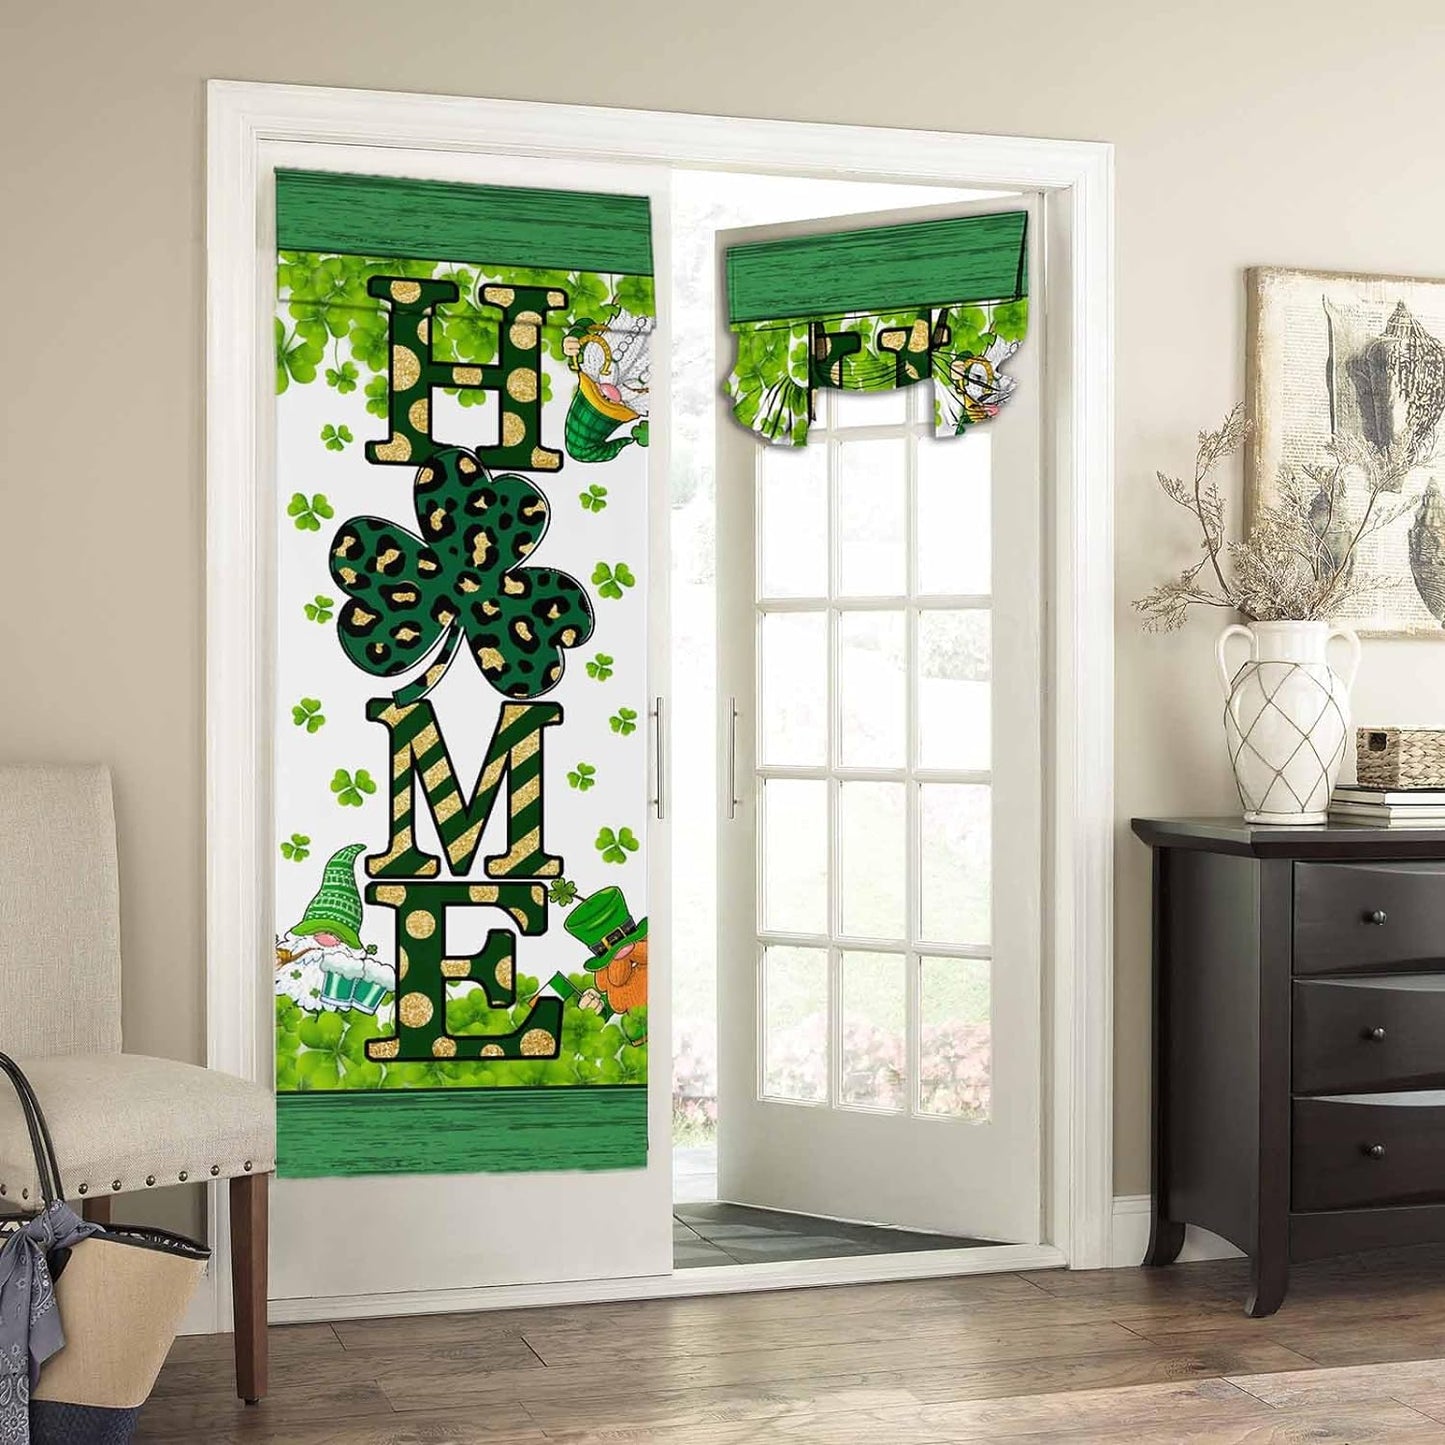 BEMIGO Door Curtains for Door Windows, Vintage Wooden Door Window Curtains for French Glass Door, Privacy Thermal Insulated Tie up Door Shades, Farmhouse Colorful Small Window Curtains 26 X 42 Inch  BEMIGO Green St Patrick 70.00" X 26.00" 